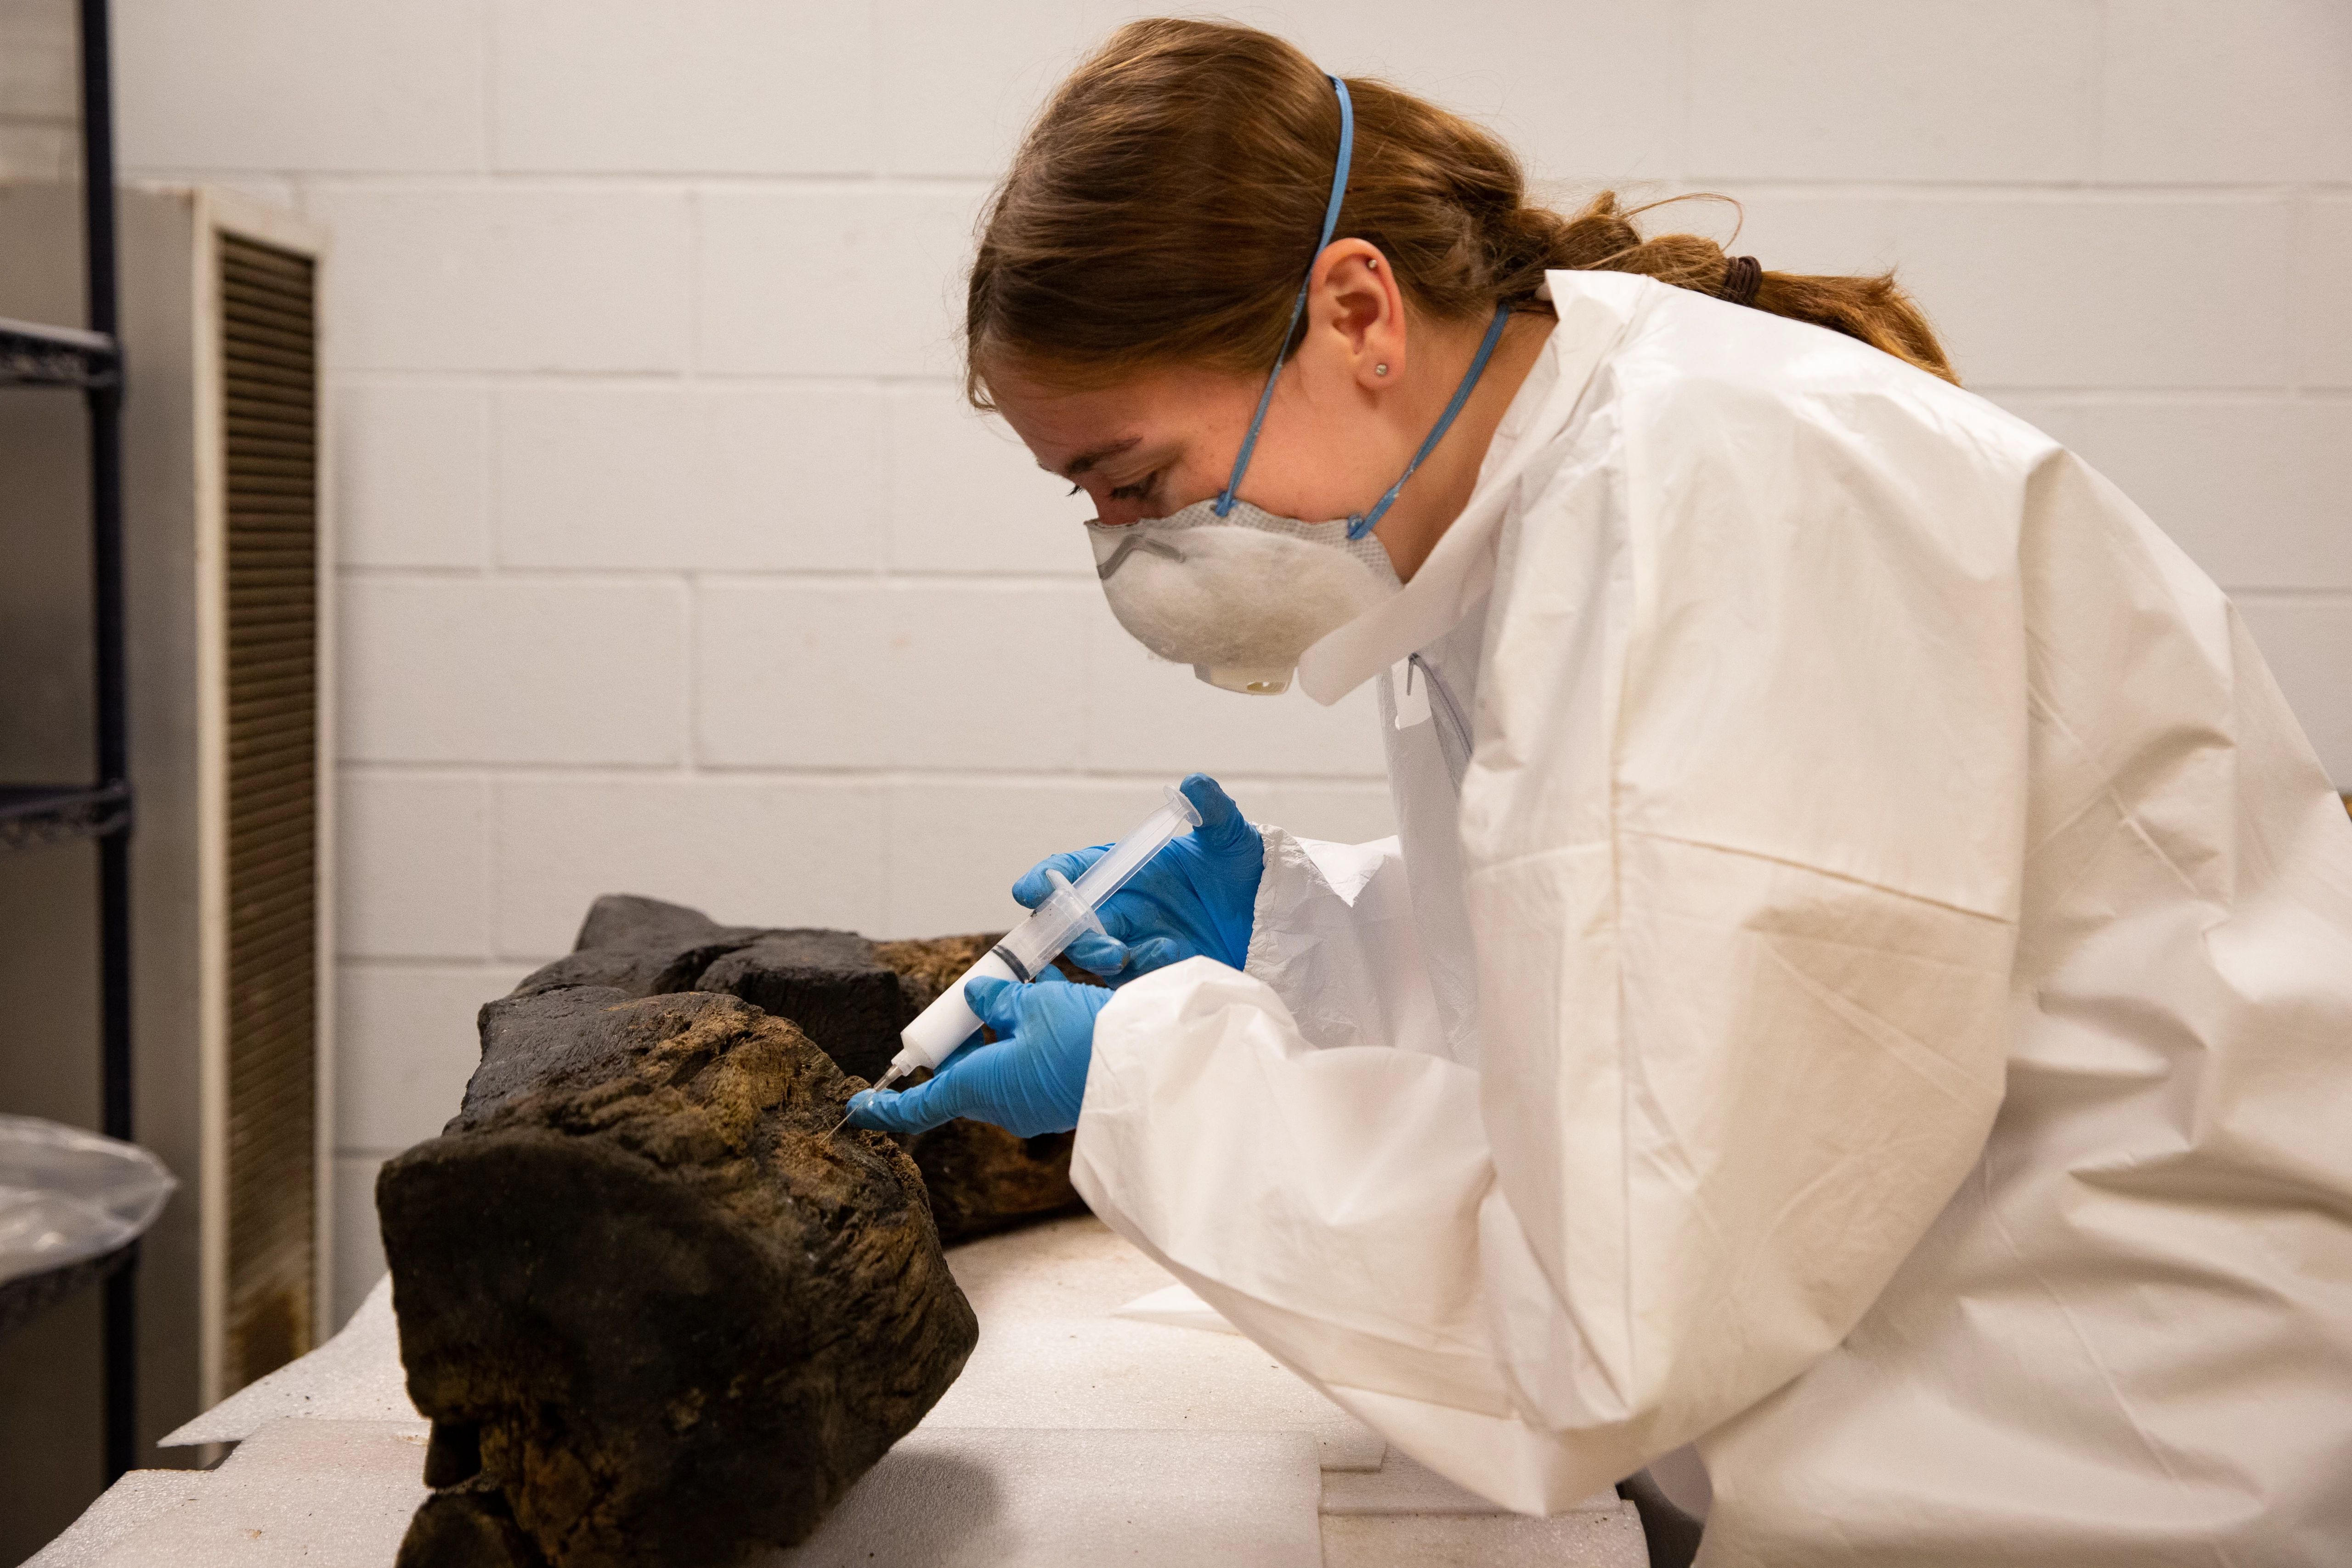 Image of conservator wearing a white lab coat, blue gloves, and face mask, carefully injecting a white substance into a large section of wood.